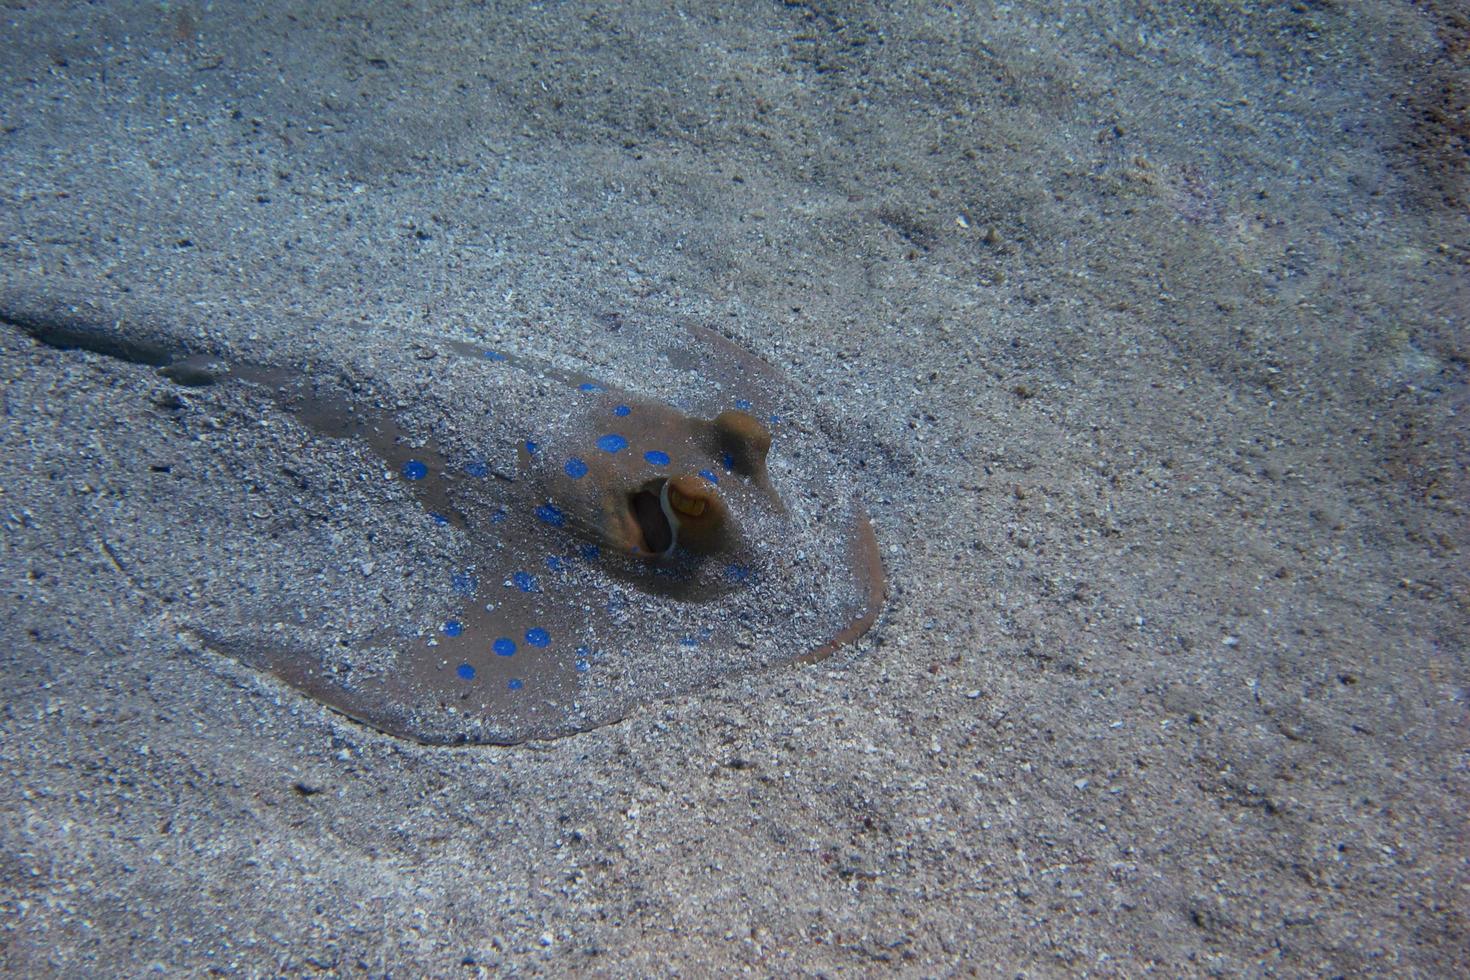 stingray hiding in the seabed photo